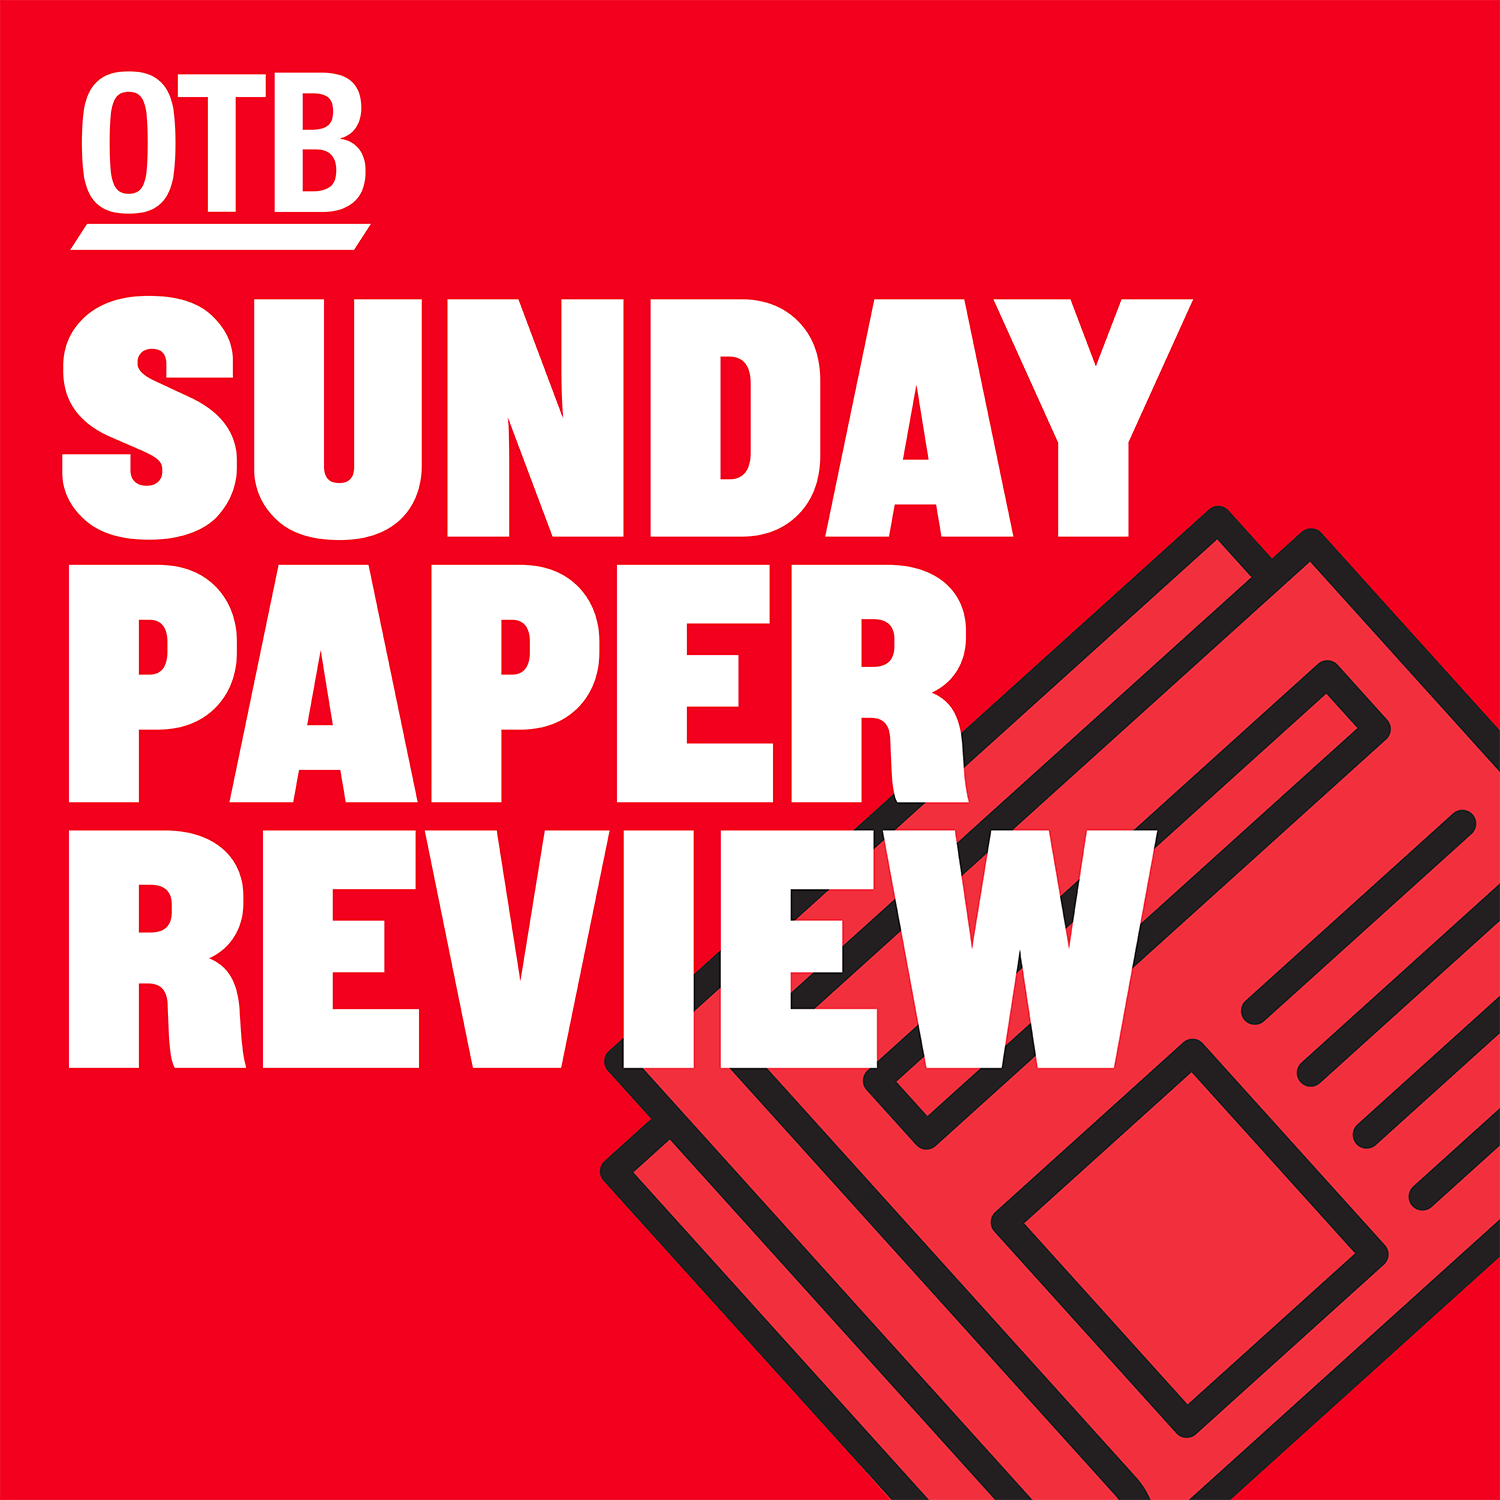 SUNDAY PAPER REVIEW | ’Cocaine is rampant in Irish life’ | DAN MCDONNELL & DION FANNING